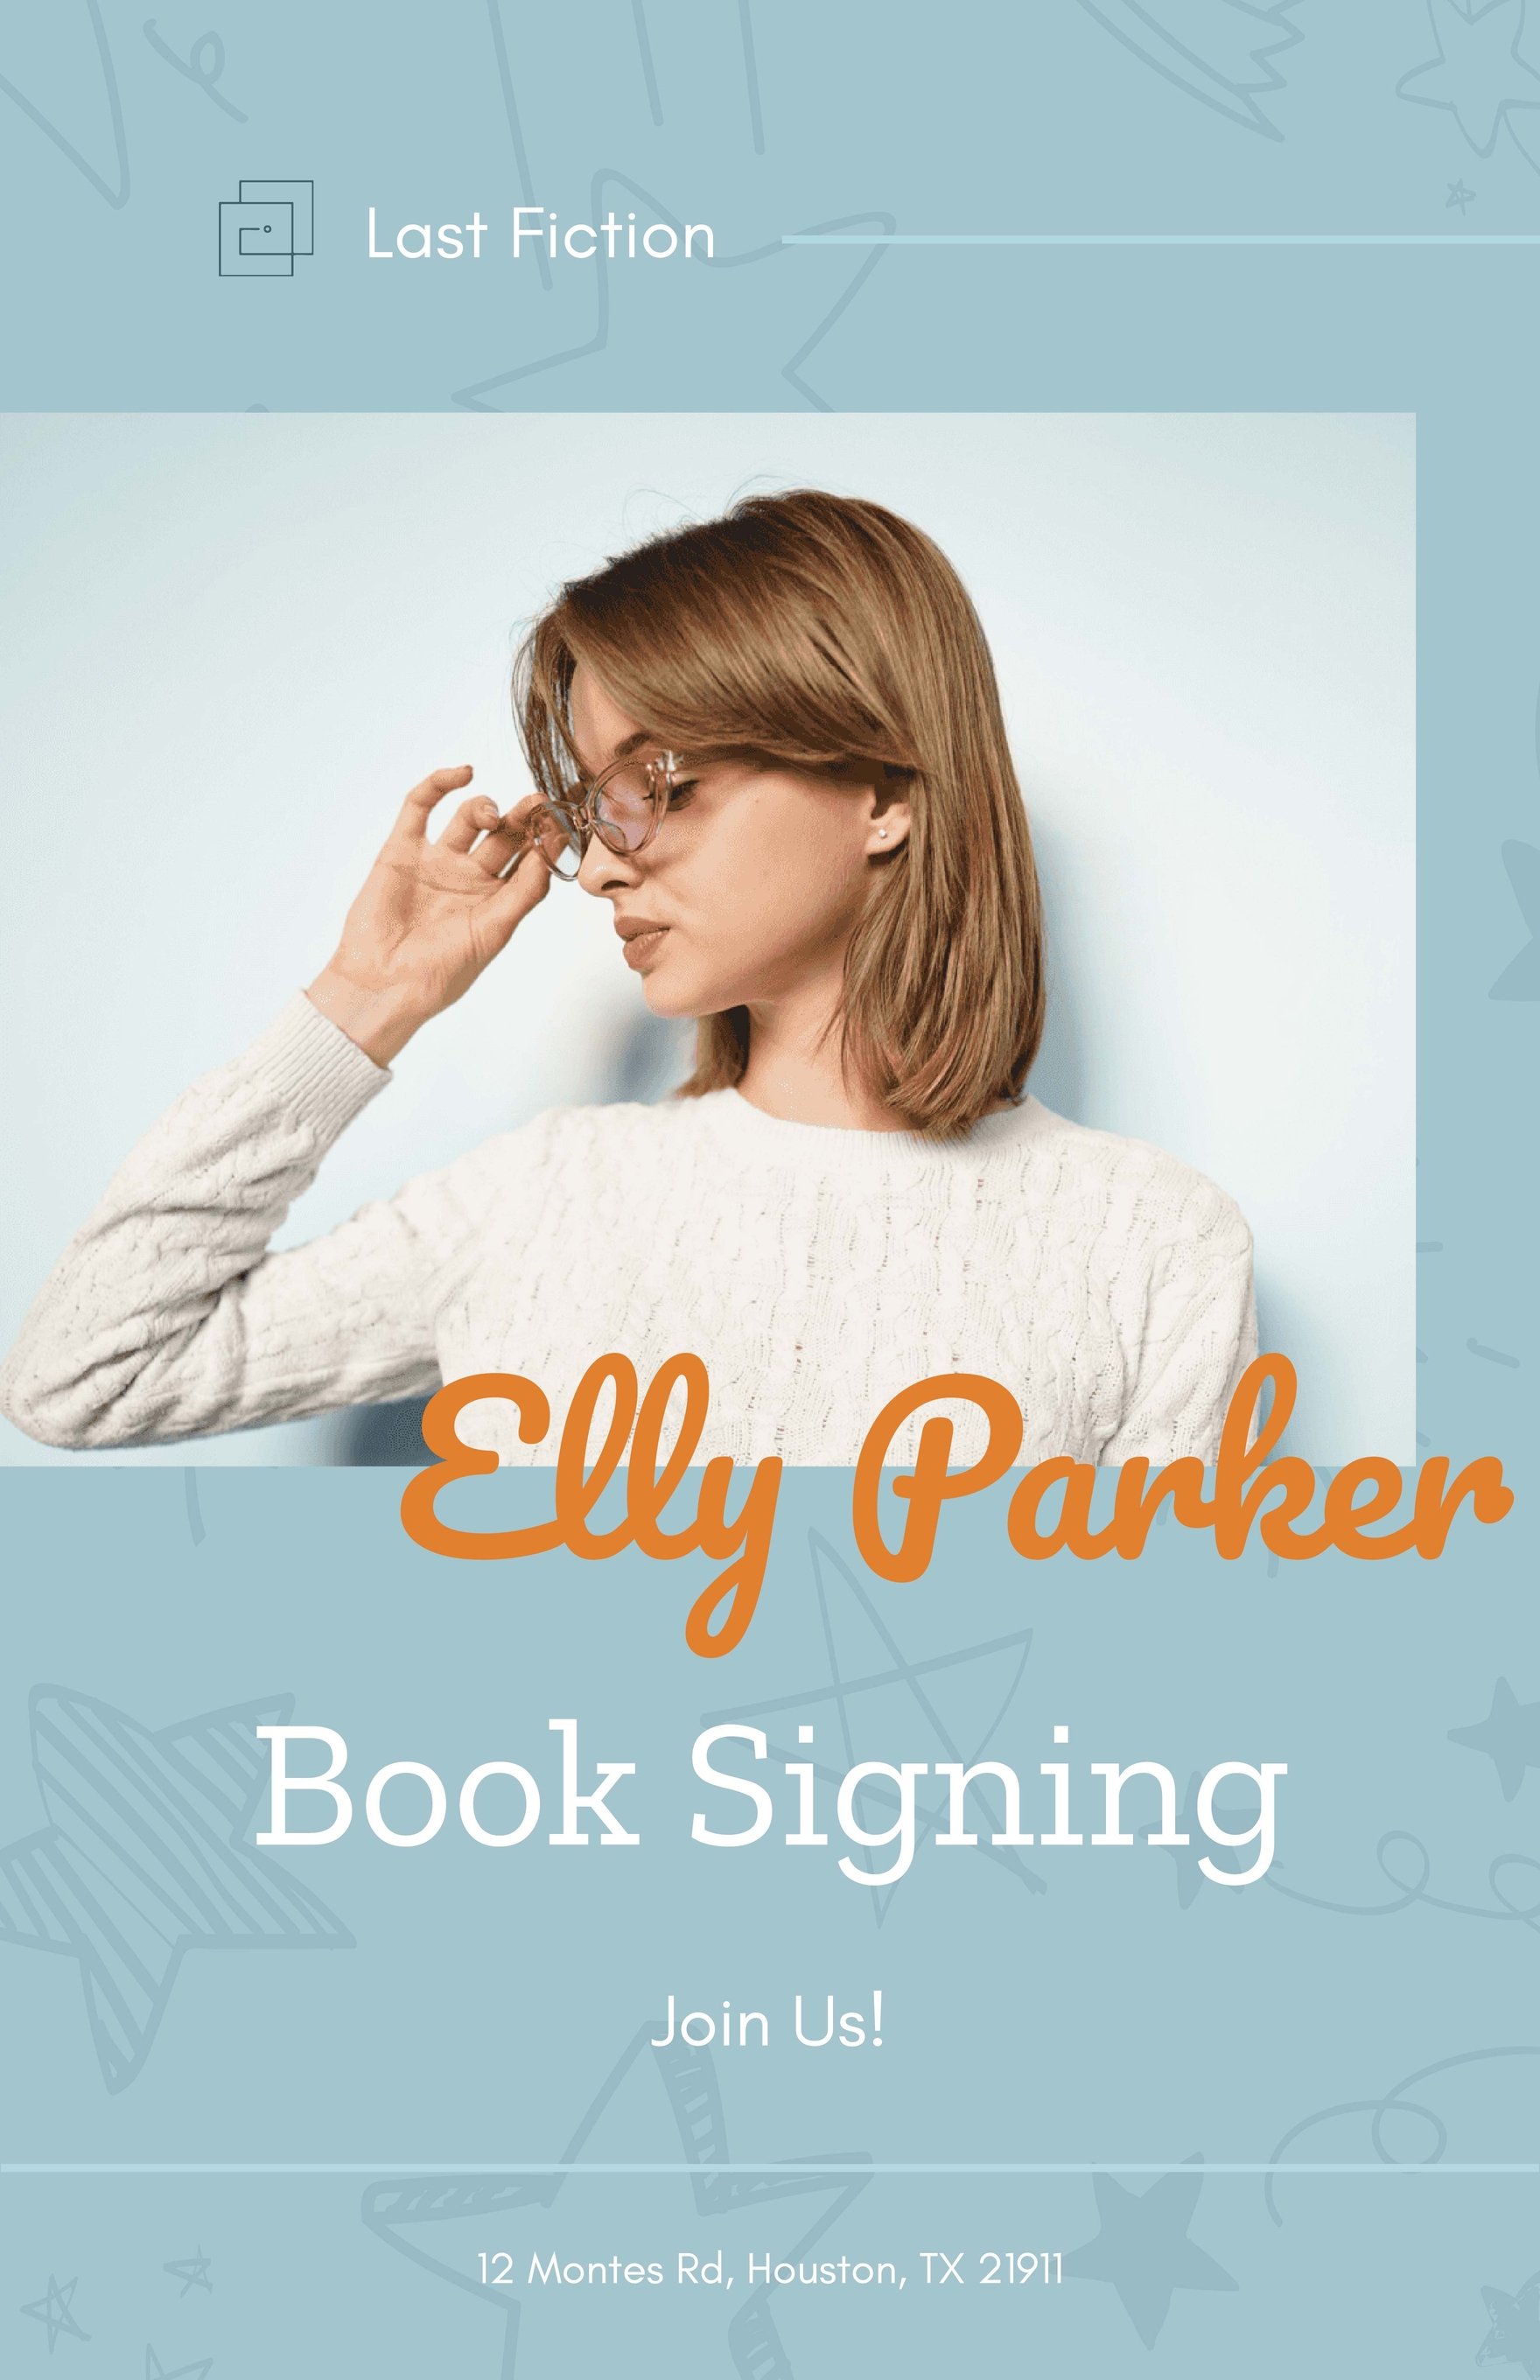 Book Signing Promotion Poster